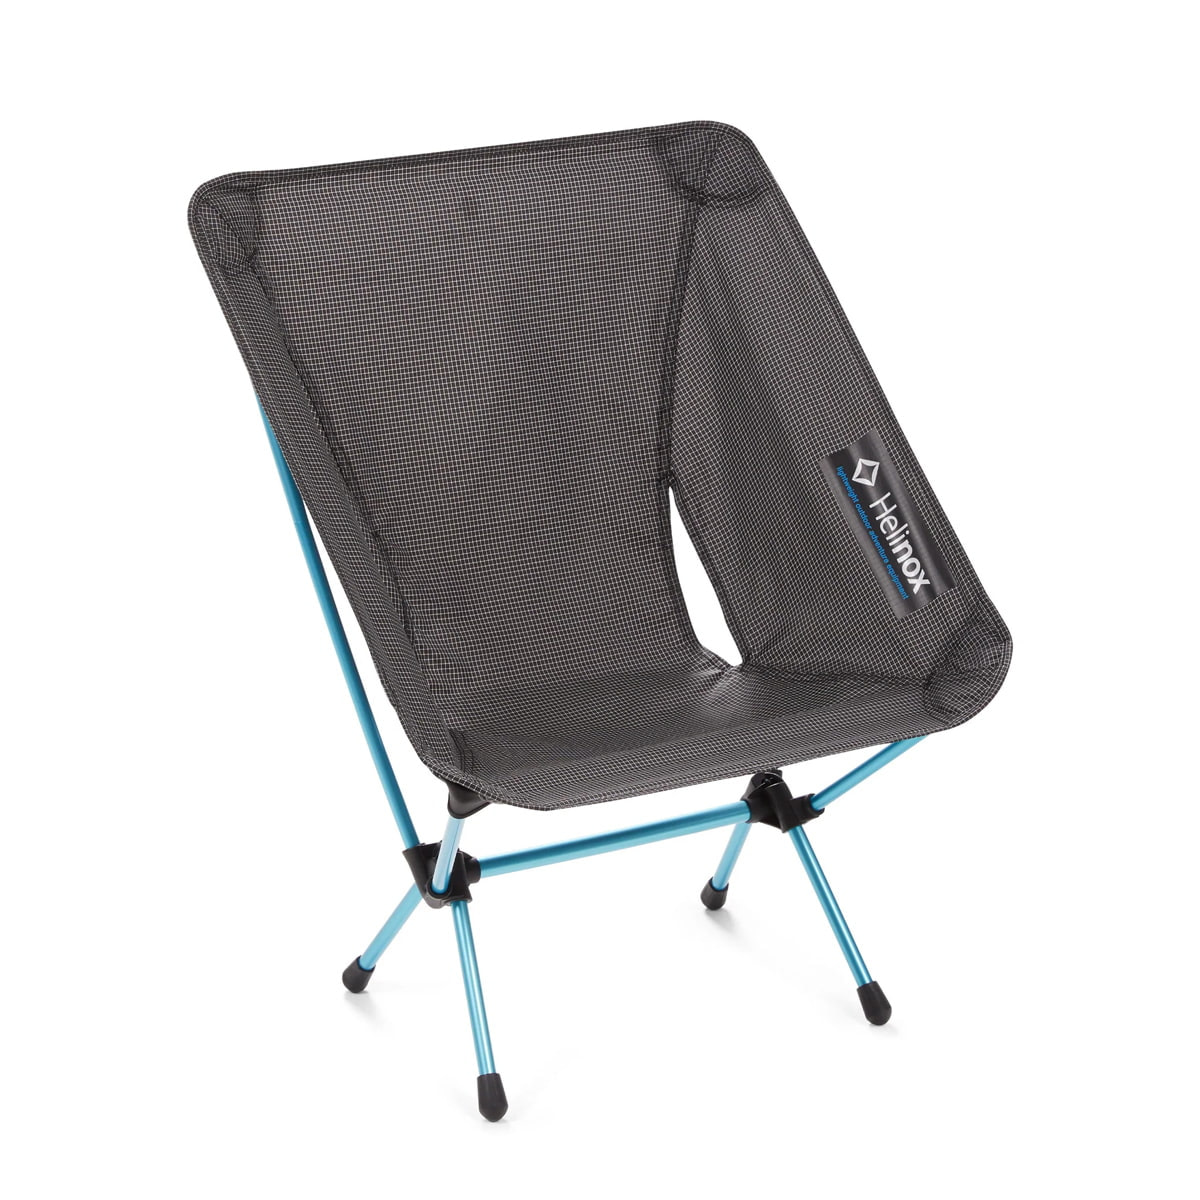 Best camping chair in 2022